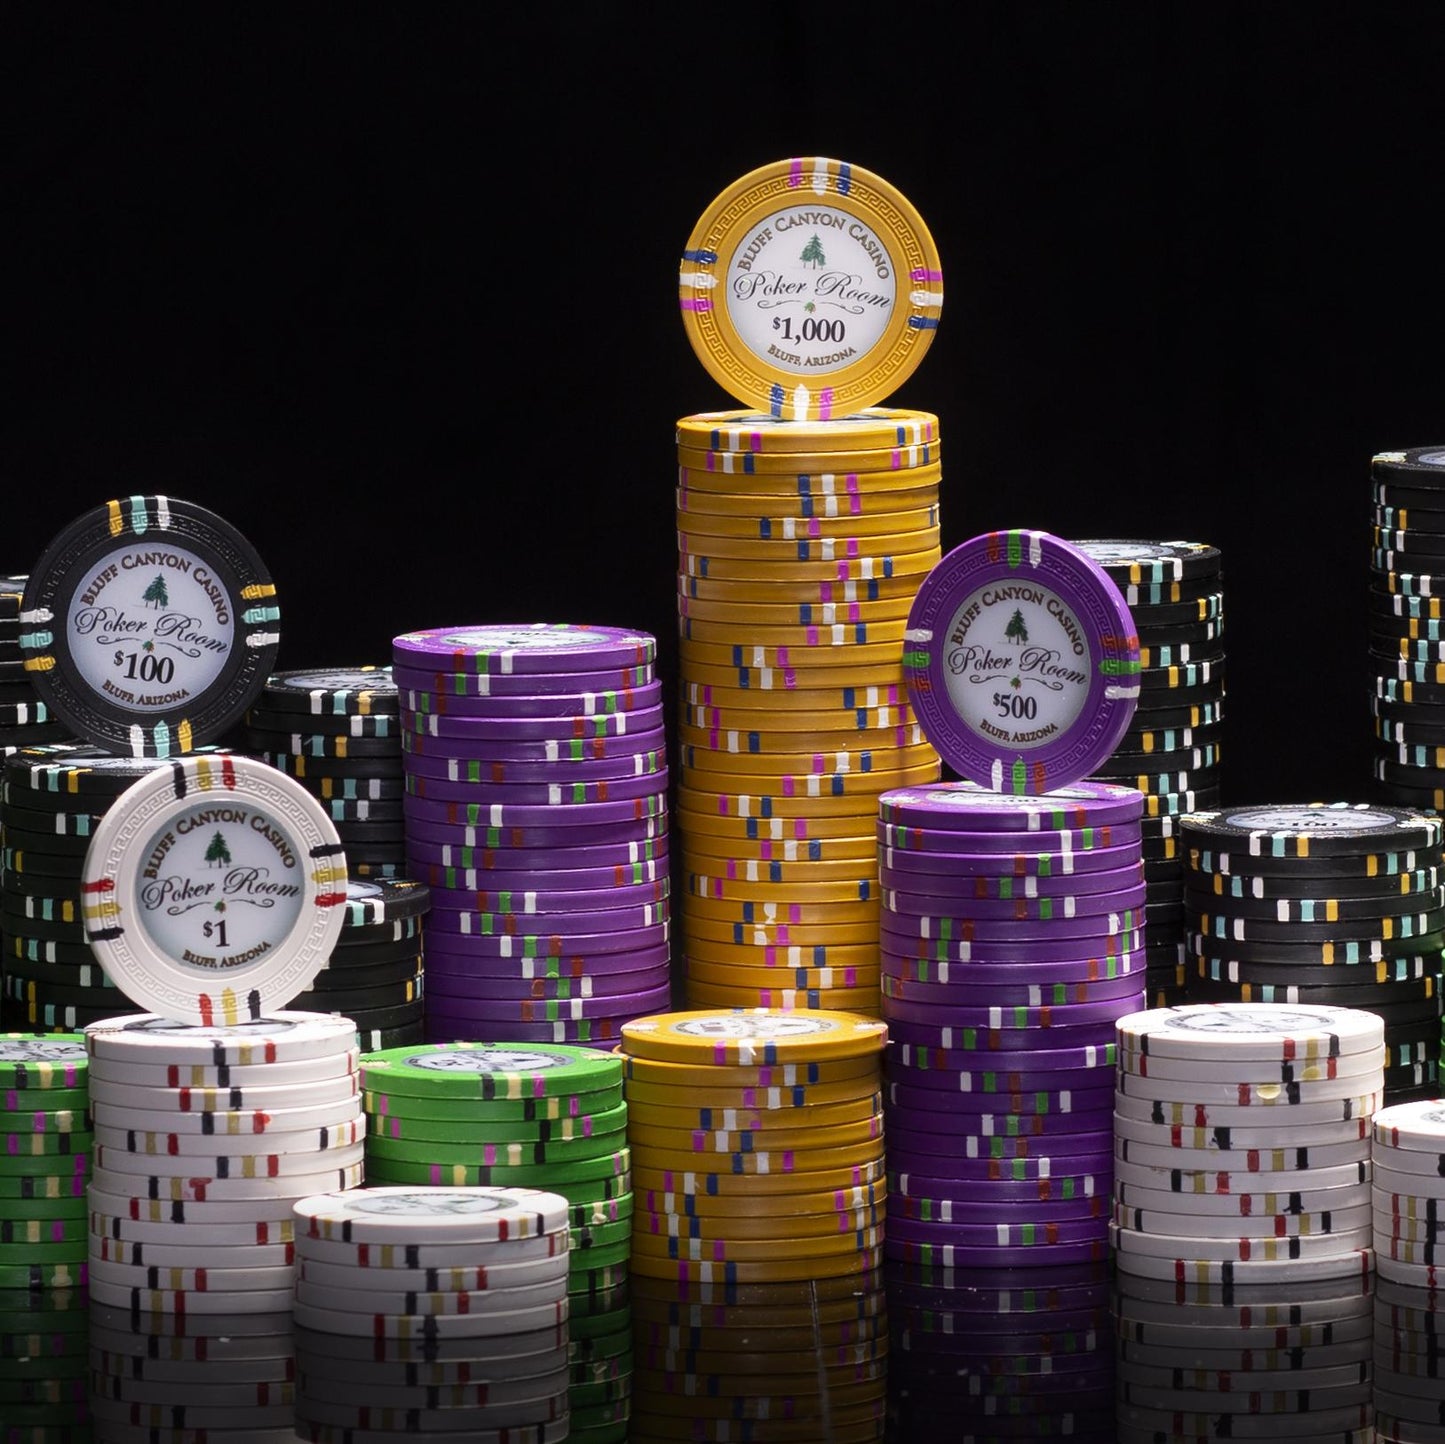 500 Bluff Canyon Poker Chips with Hi Gloss Case